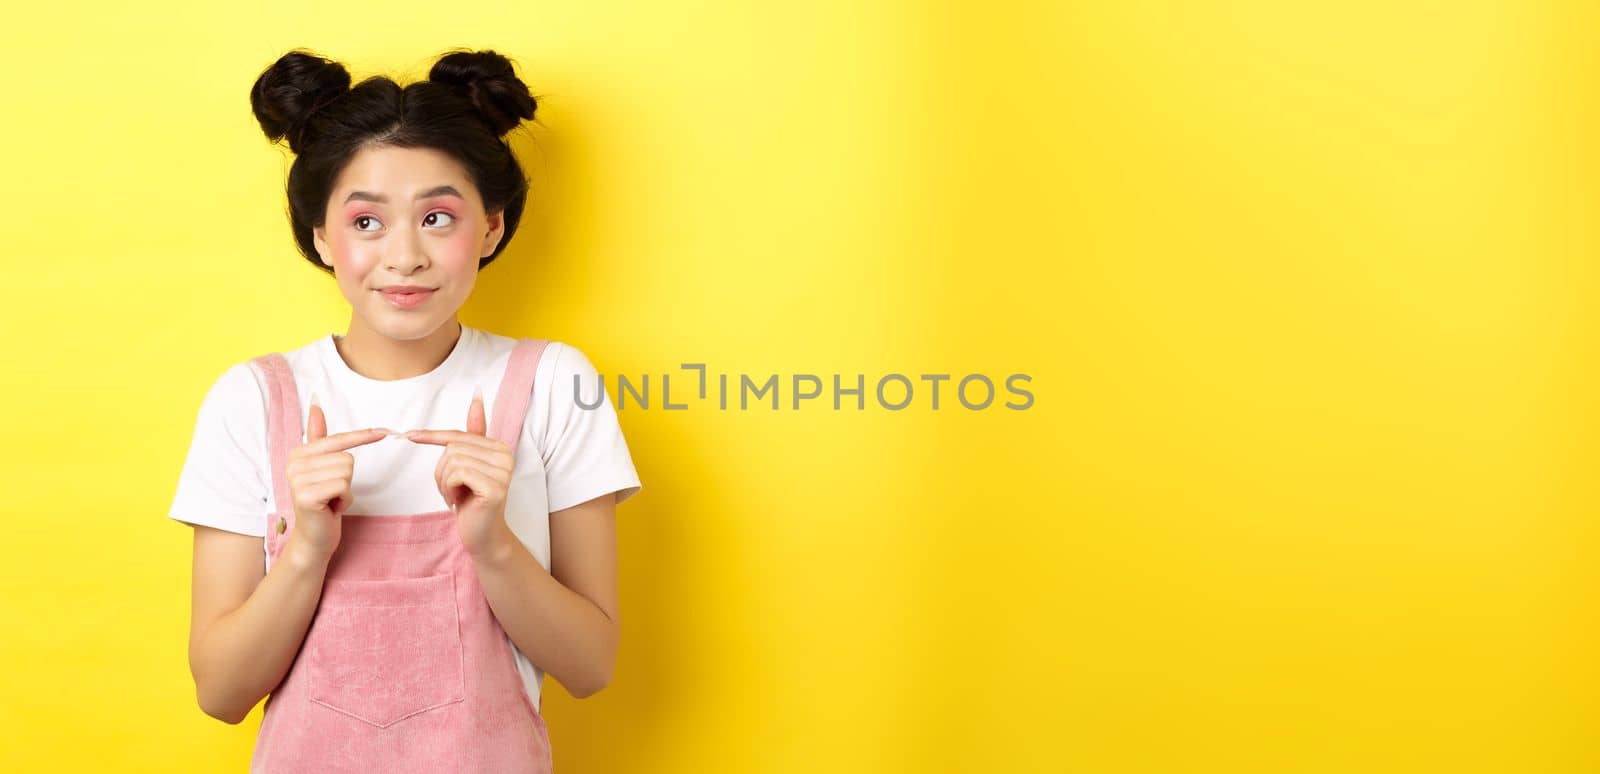 Summer lifestyle concept. Cute shy asian girl looking away and smiling silly, avoiding eye contact, standing against yellow background.